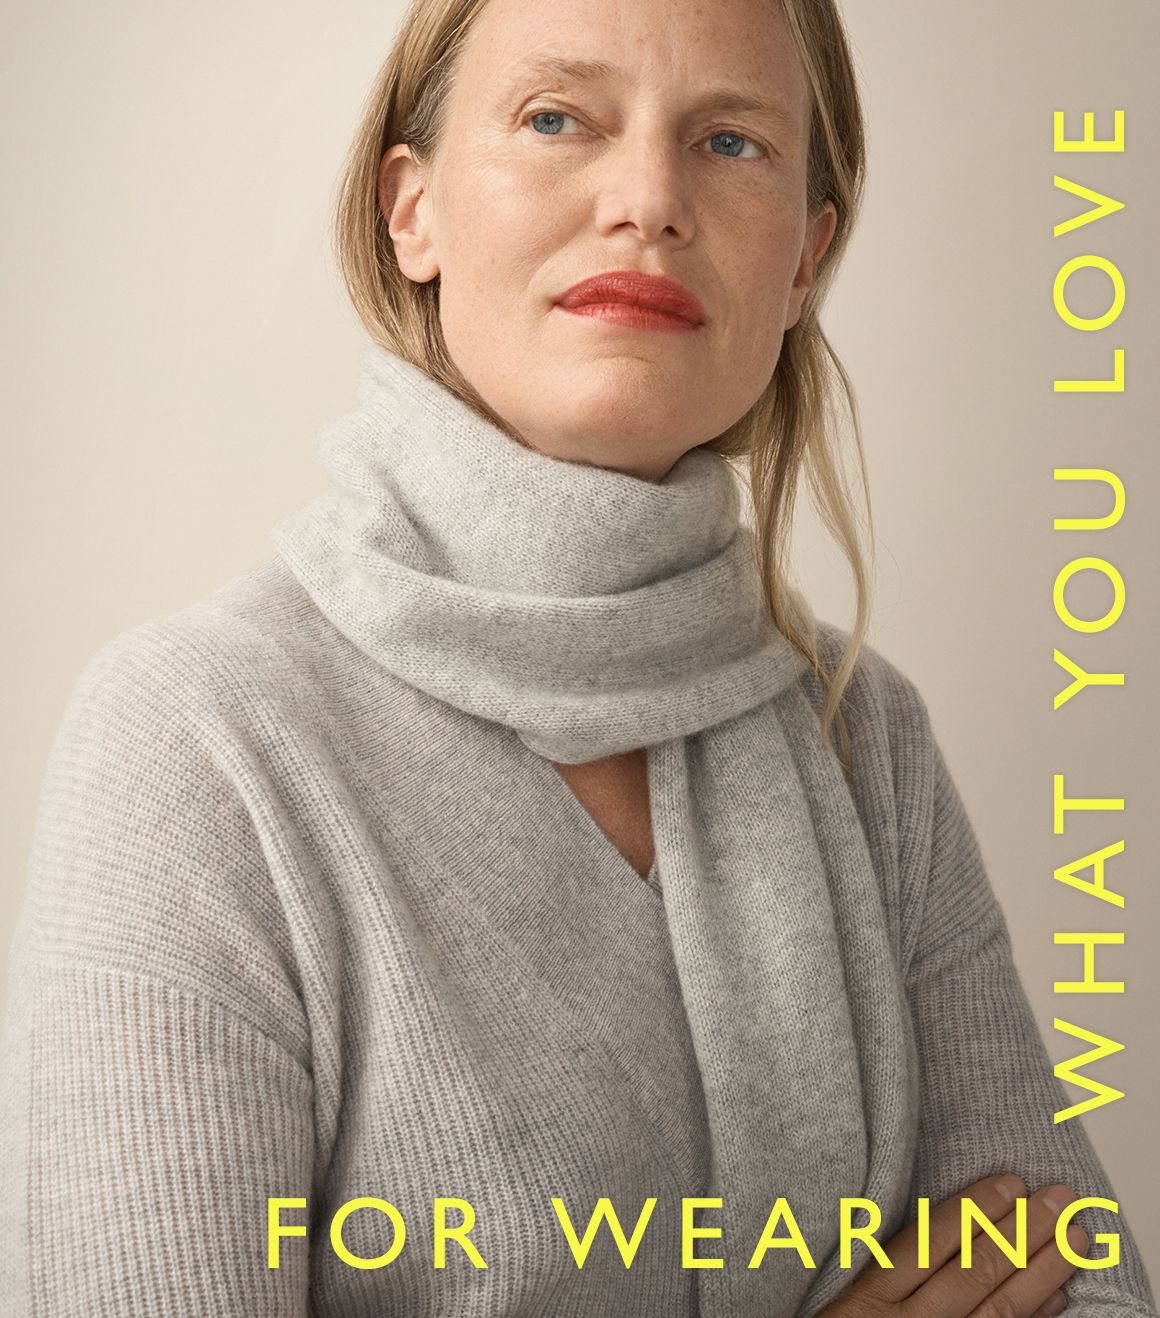 For wearing what you love